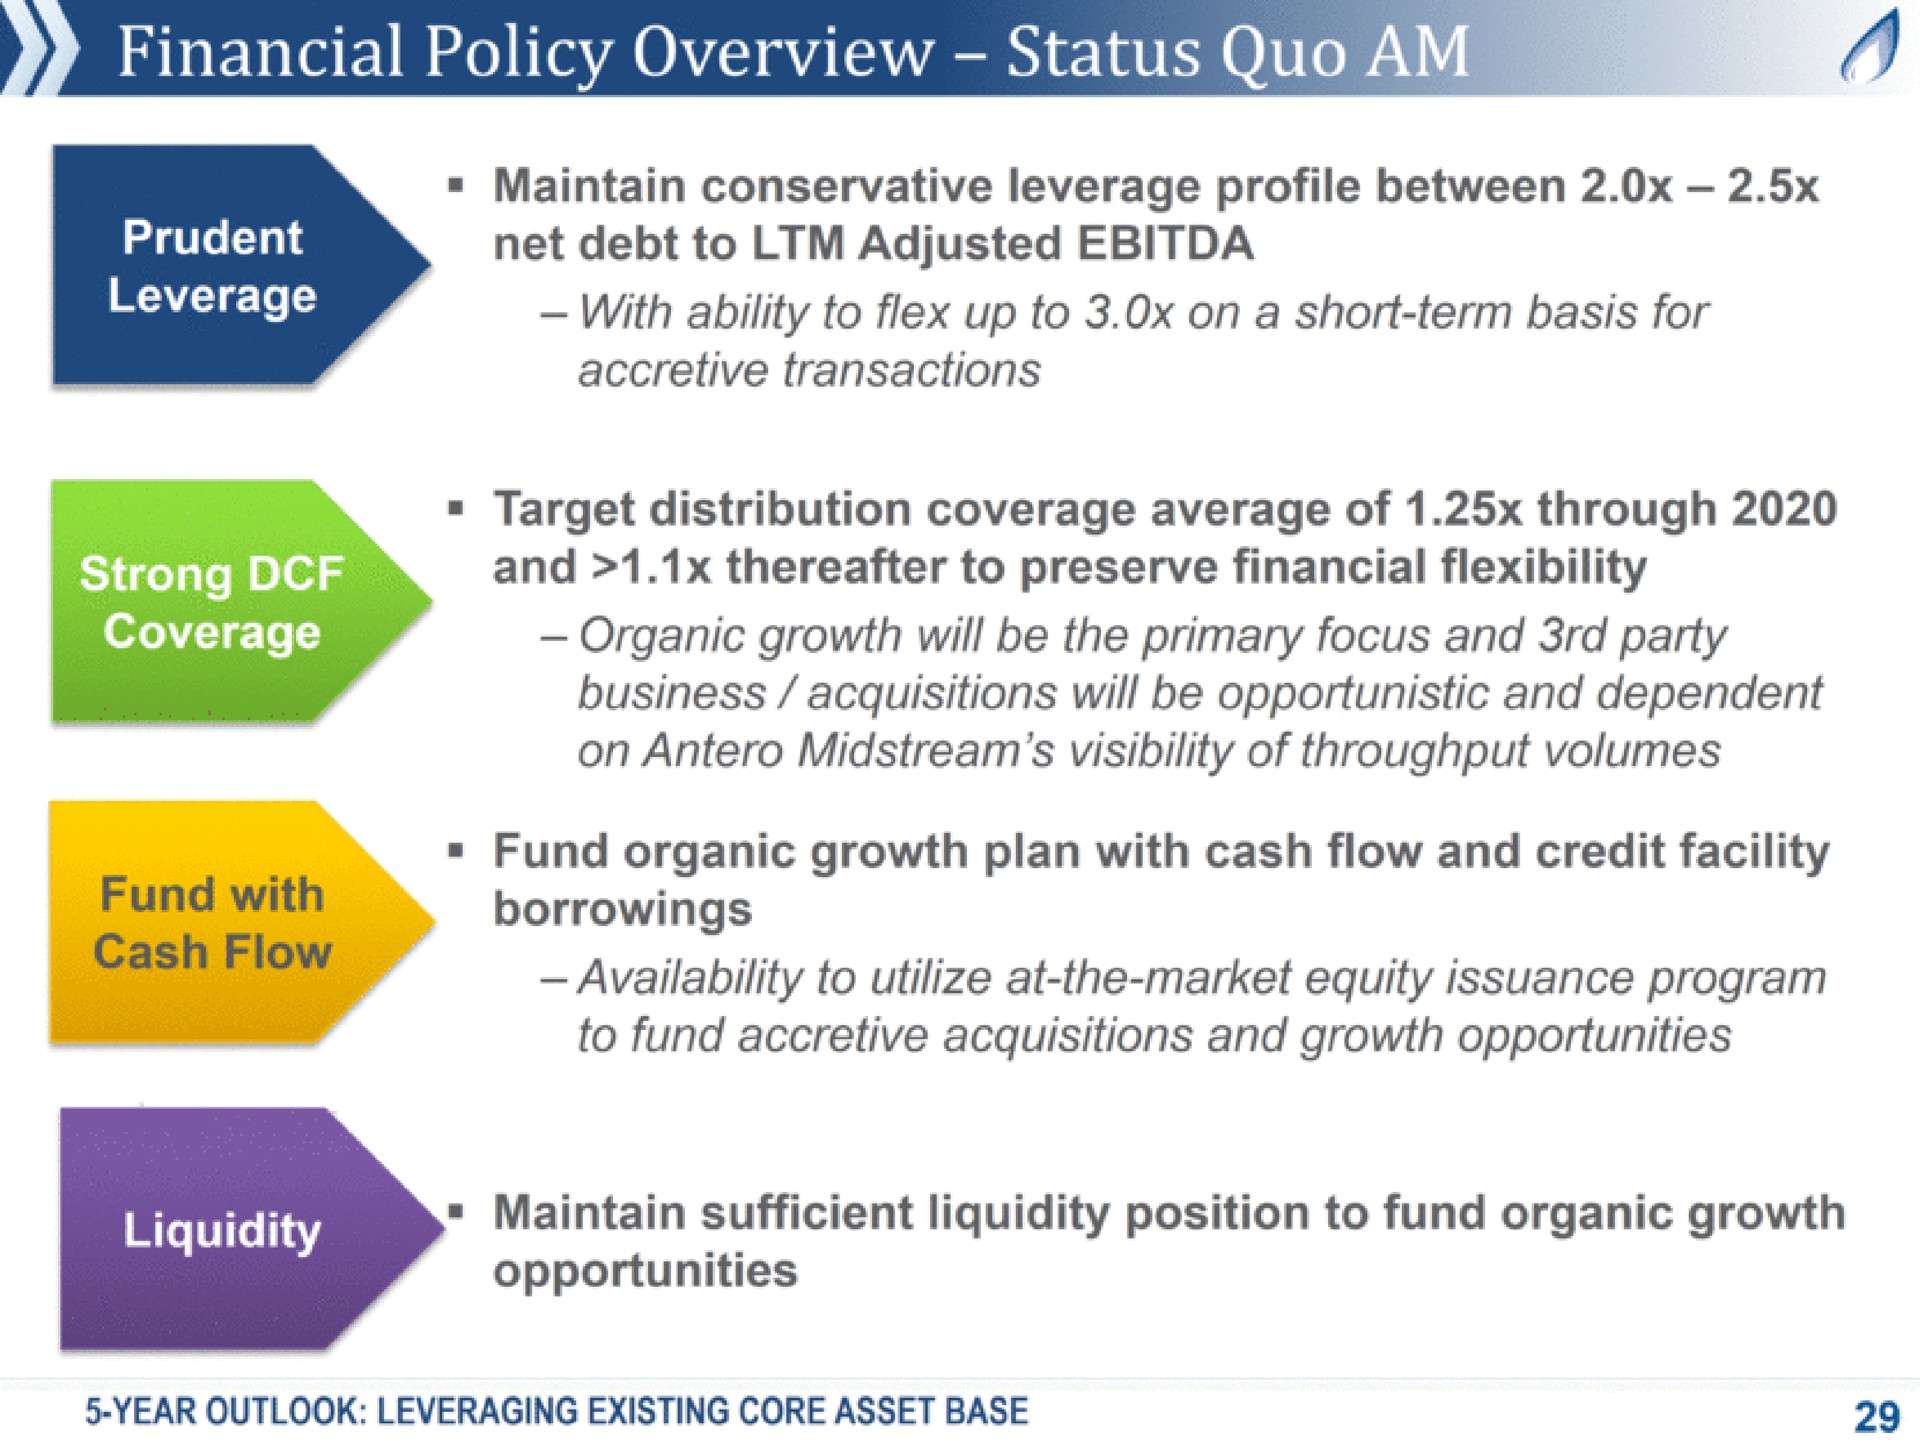 financial policy overview status quo am a gate tal leverage maintain conservative leverage profile between net debt to adjusted with ability to flex up to on a short term basis for accretive transactions strong ere target distribution coverage average of through and thereafter to preserve financial flexibility organic growth will be the primary focus and party business acquisitions will be opportunistic and dependent on midstream visibility of throughput volumes fund organic growth plan with cash flow and credit facility borrowings availability to utilize at the market equity issuance program to fund accretive acquisitions and growth opportunities maintain sufficient liquidity position to fund organic growth opportunities year outlook leveraging existing core asset base | Antero Midstream Partners